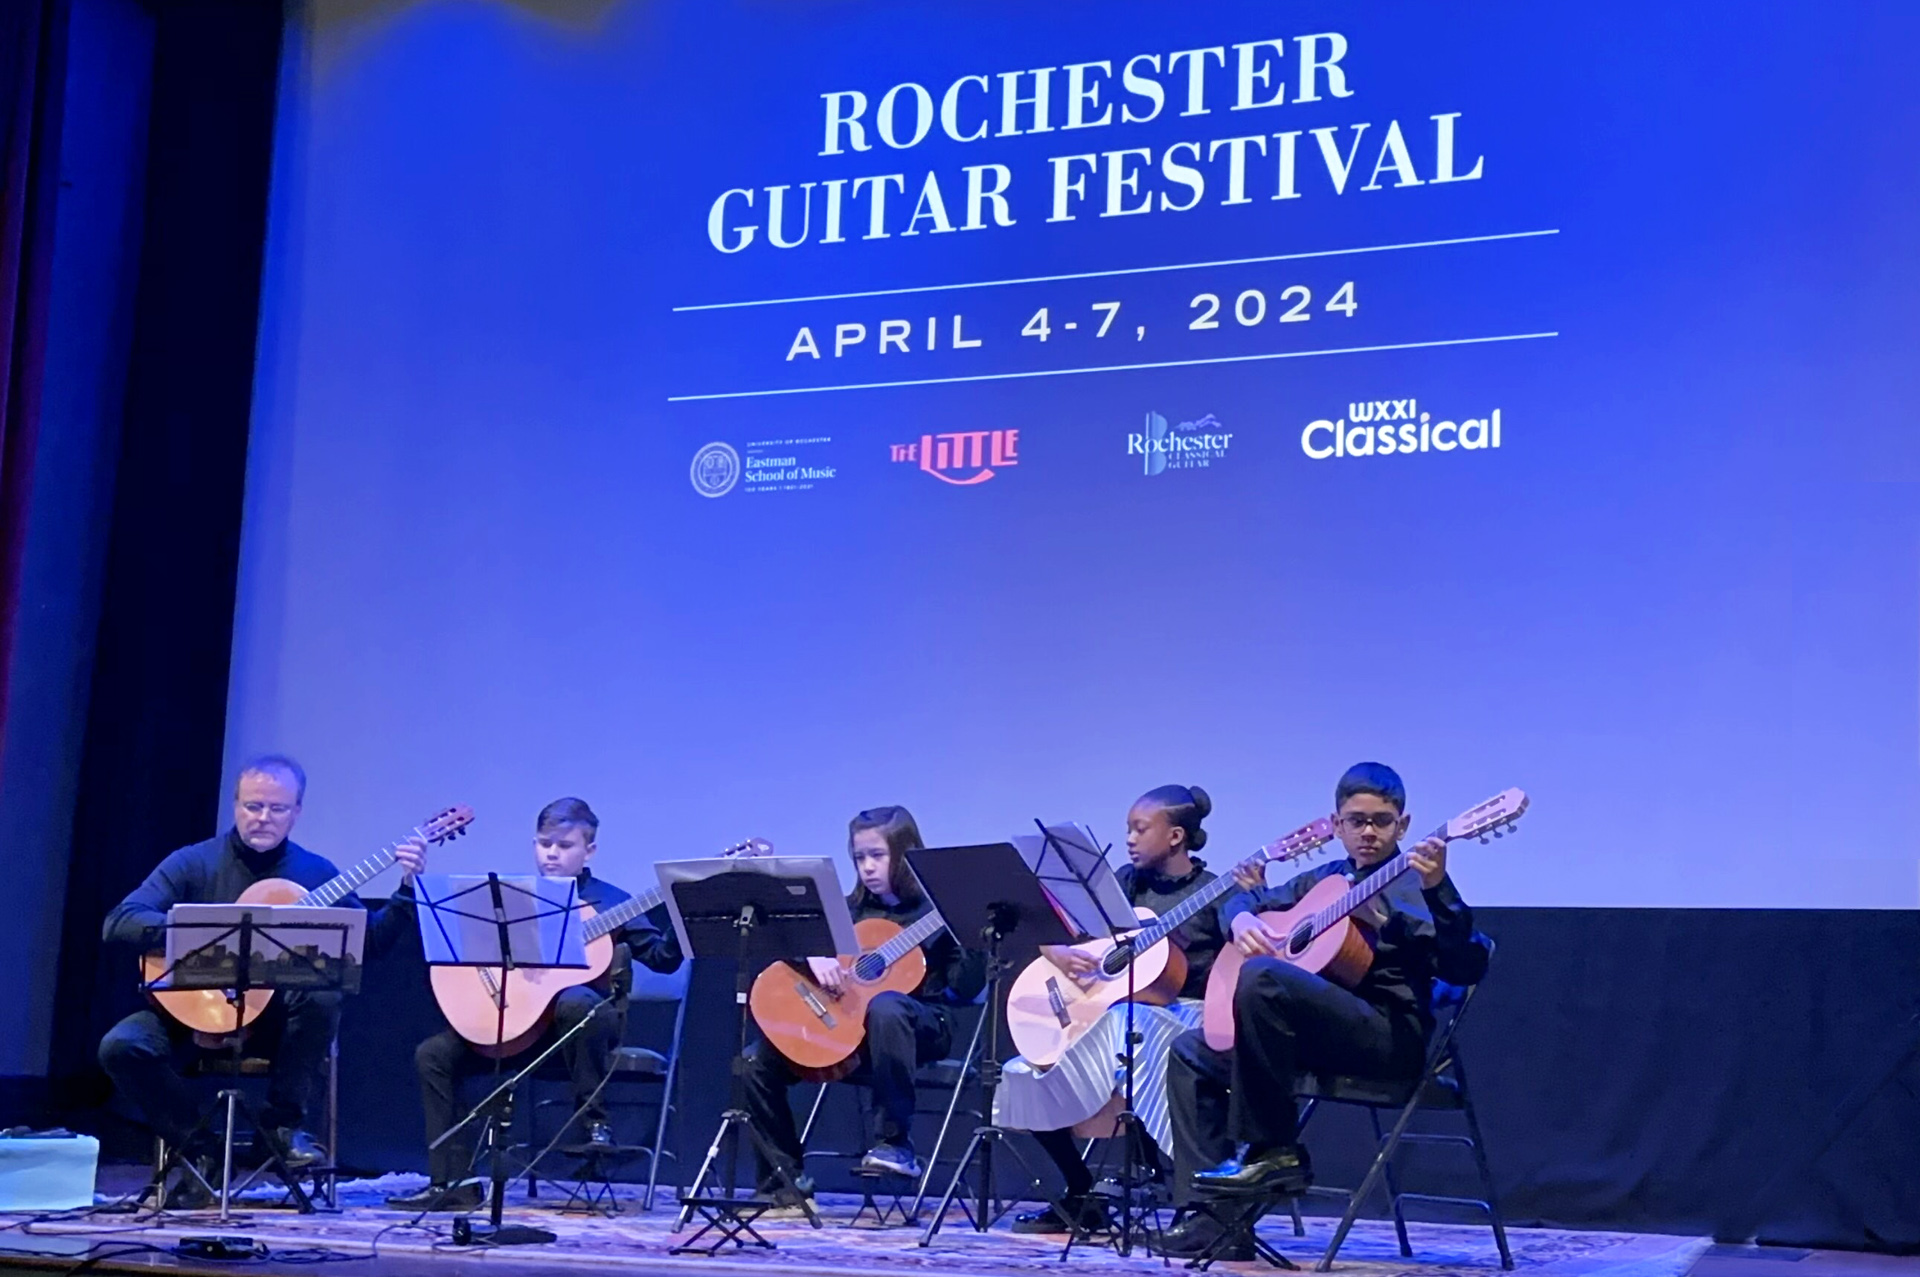 Youth Guitar Quartet performed at Little Theatre